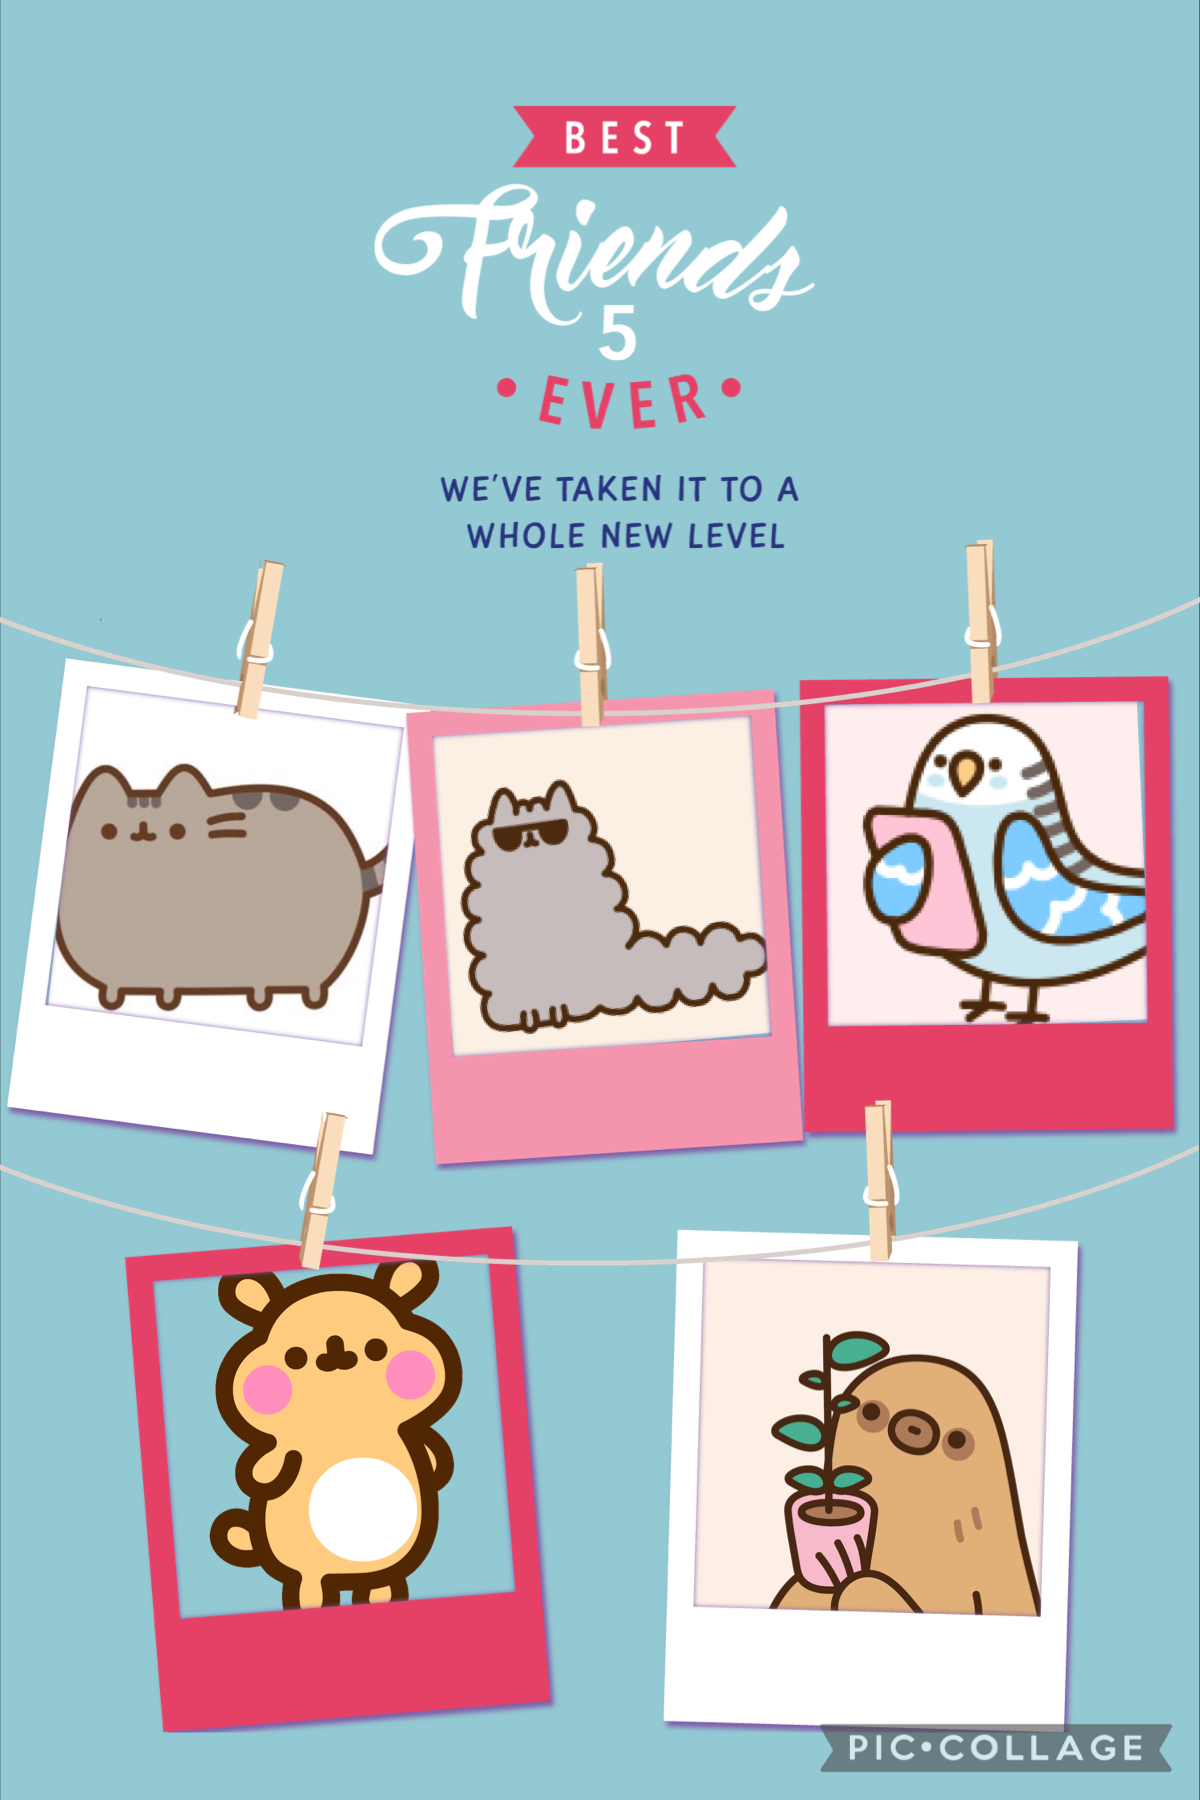 😝Tap😝
I love Pusheen, and all her friends so much!